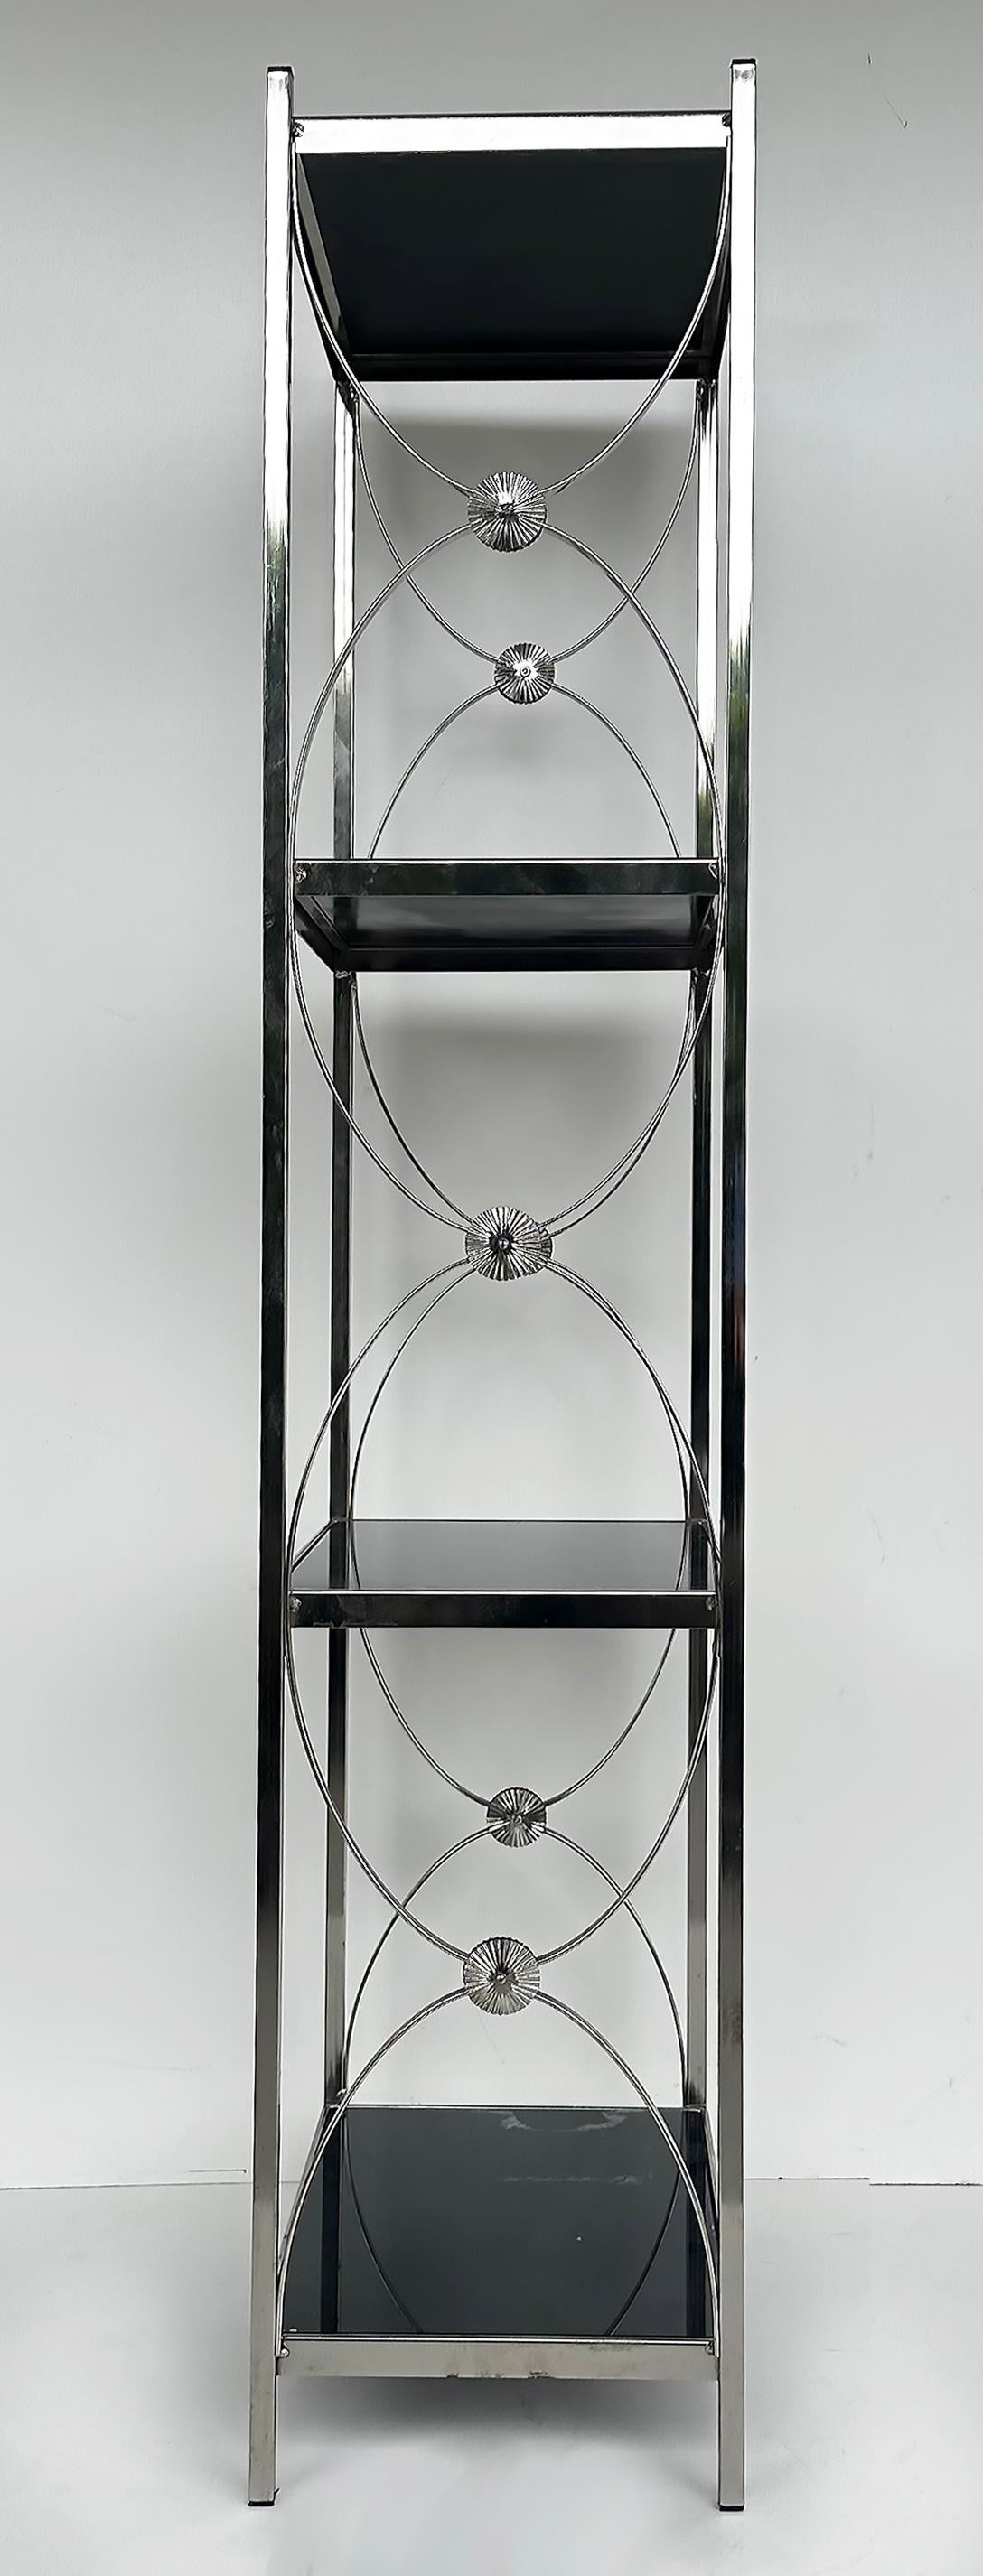 20th Century Vintage Chrome 3-Tiered Black Glass Shelves Etagere, A Pair For Sale